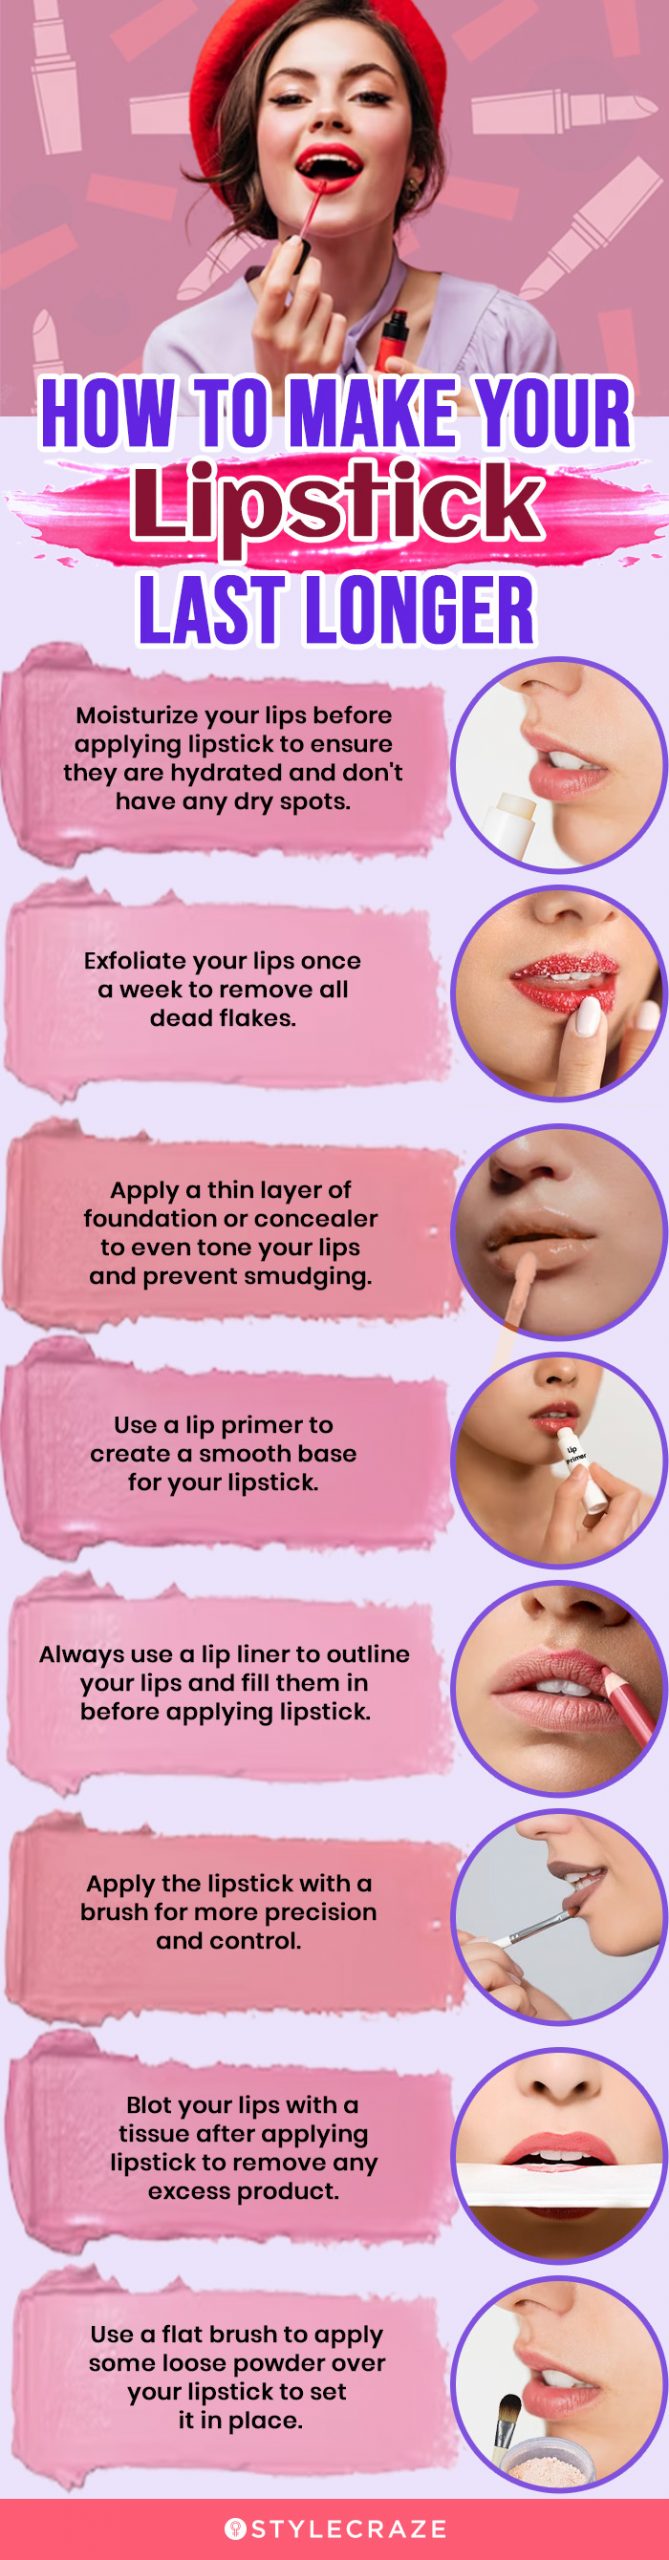 How To Make Your Lipstick Last Longer (infographic)